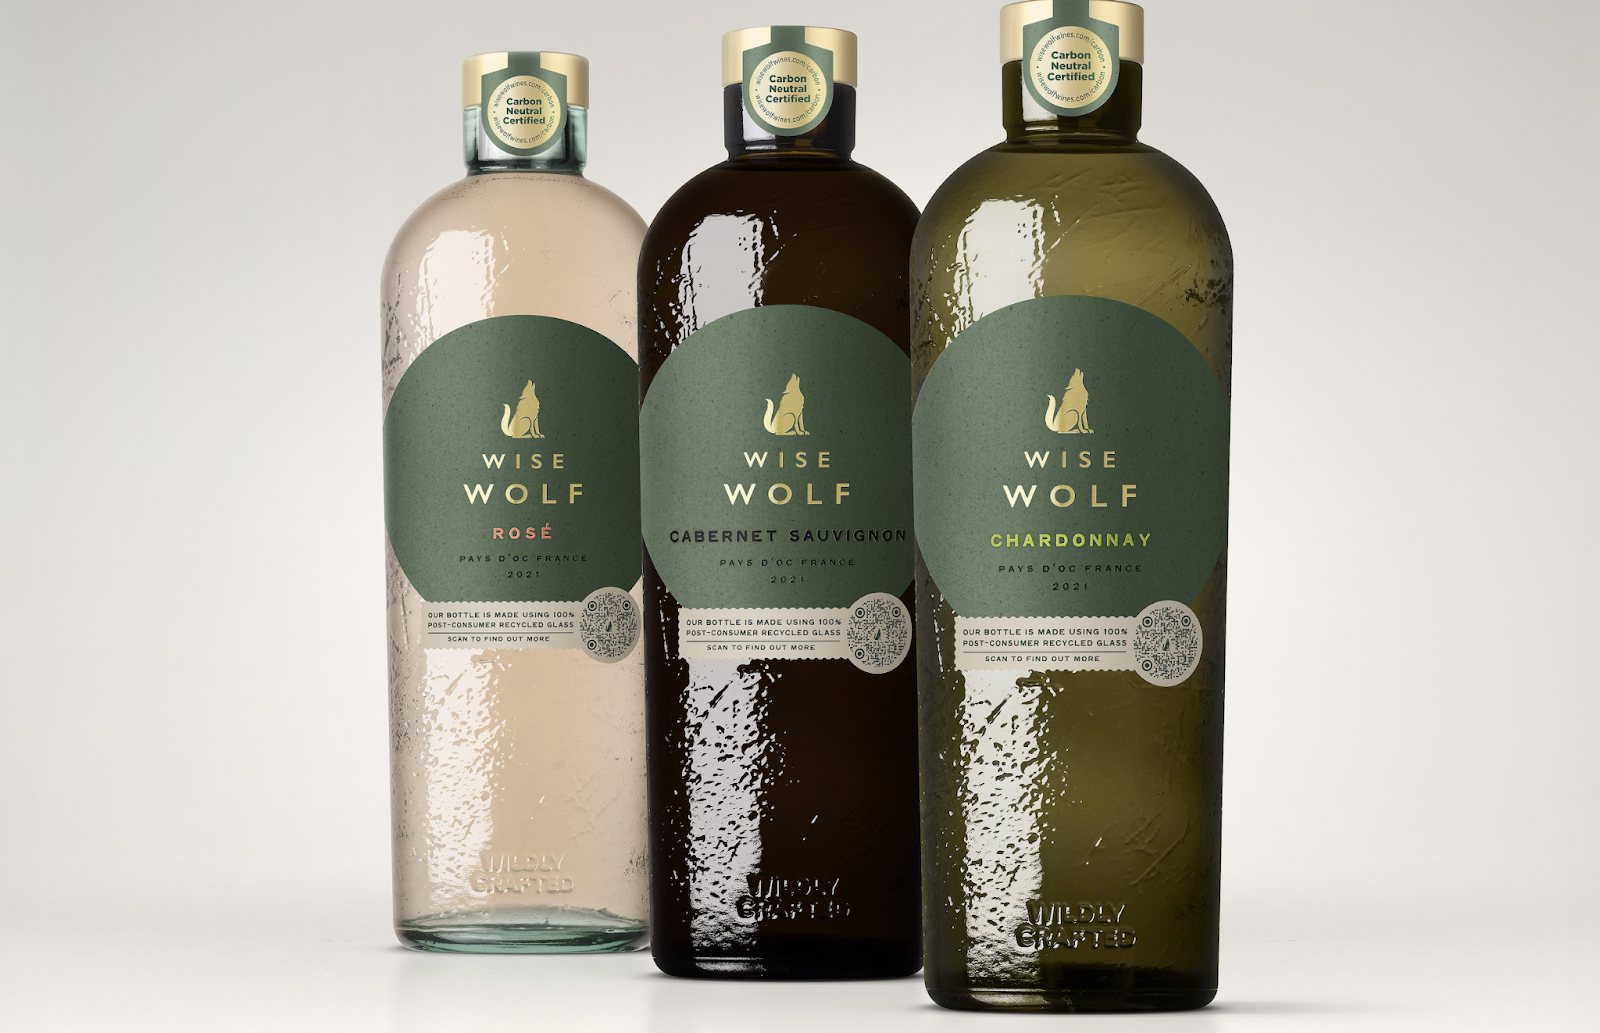 Beverage Packaging Innovation #02: Wise Wolf by Banrock Station